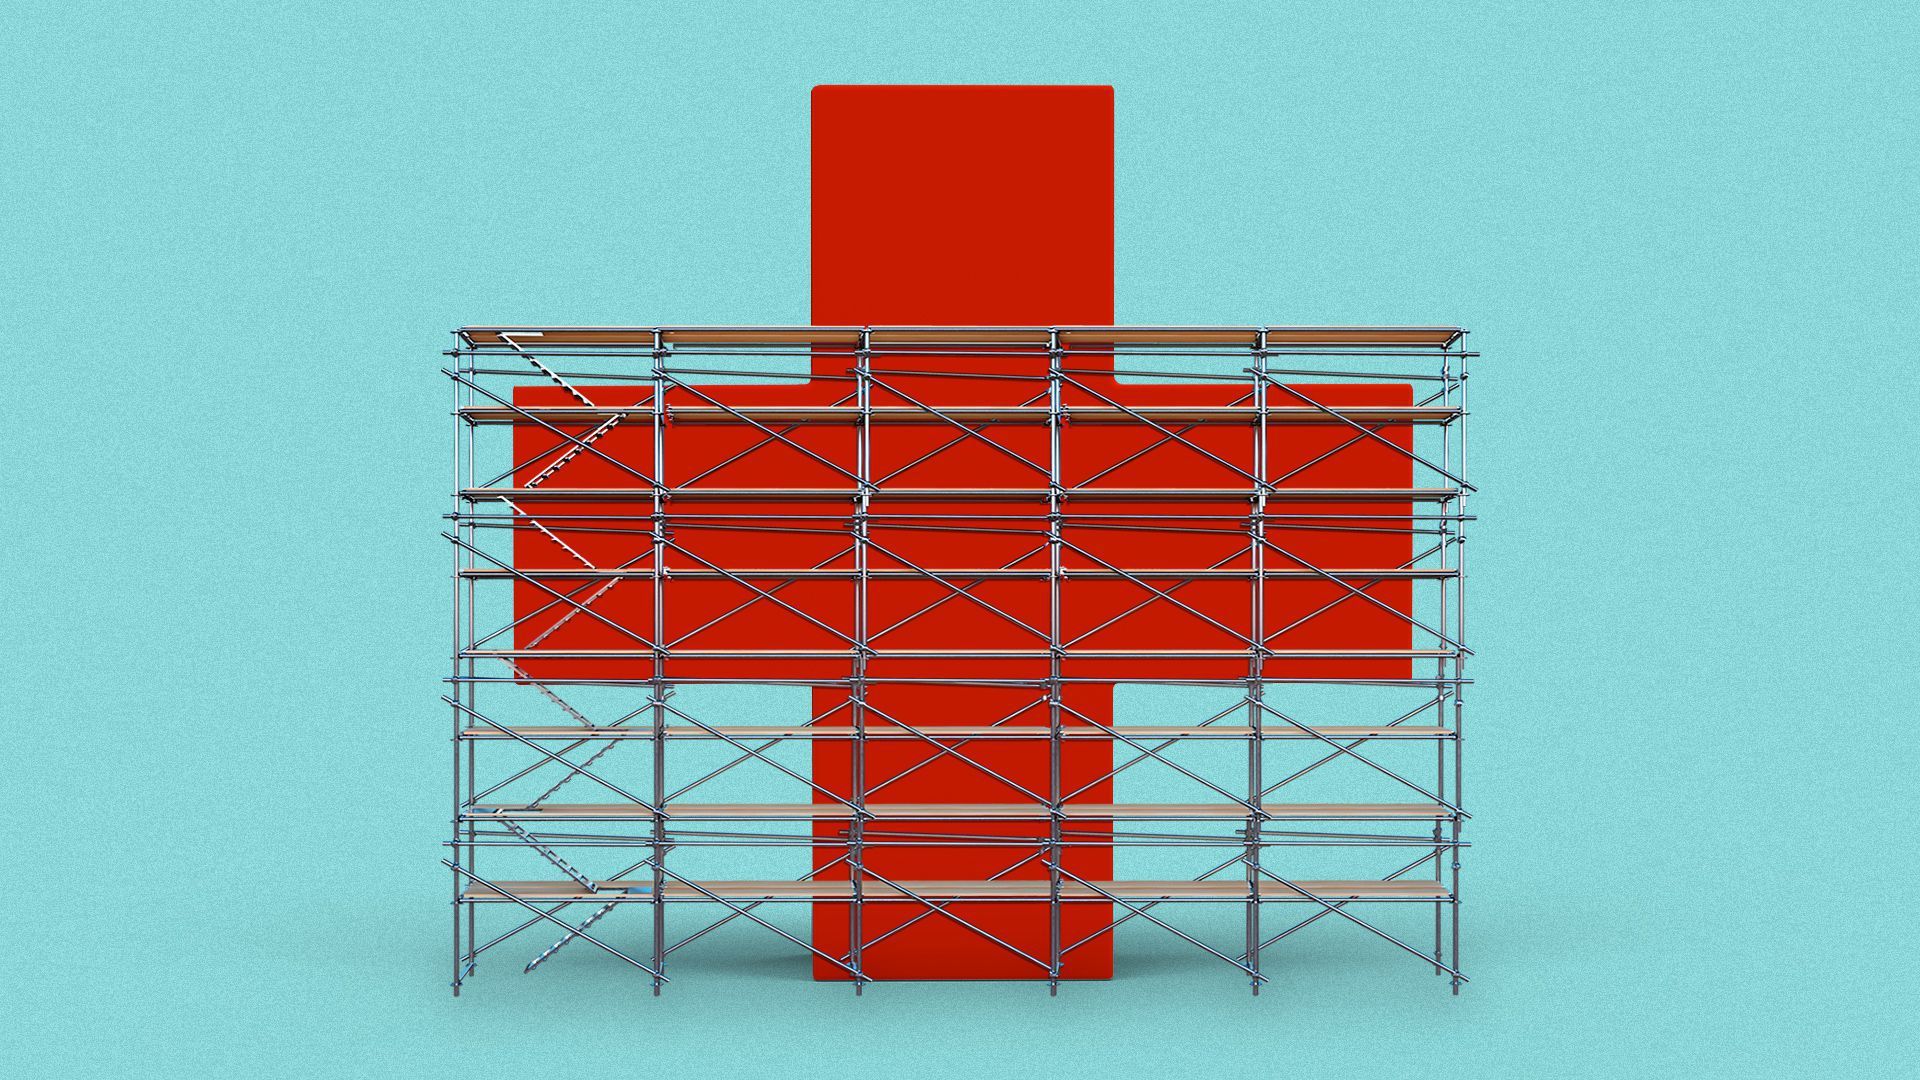 Illustration of a red cross under construction